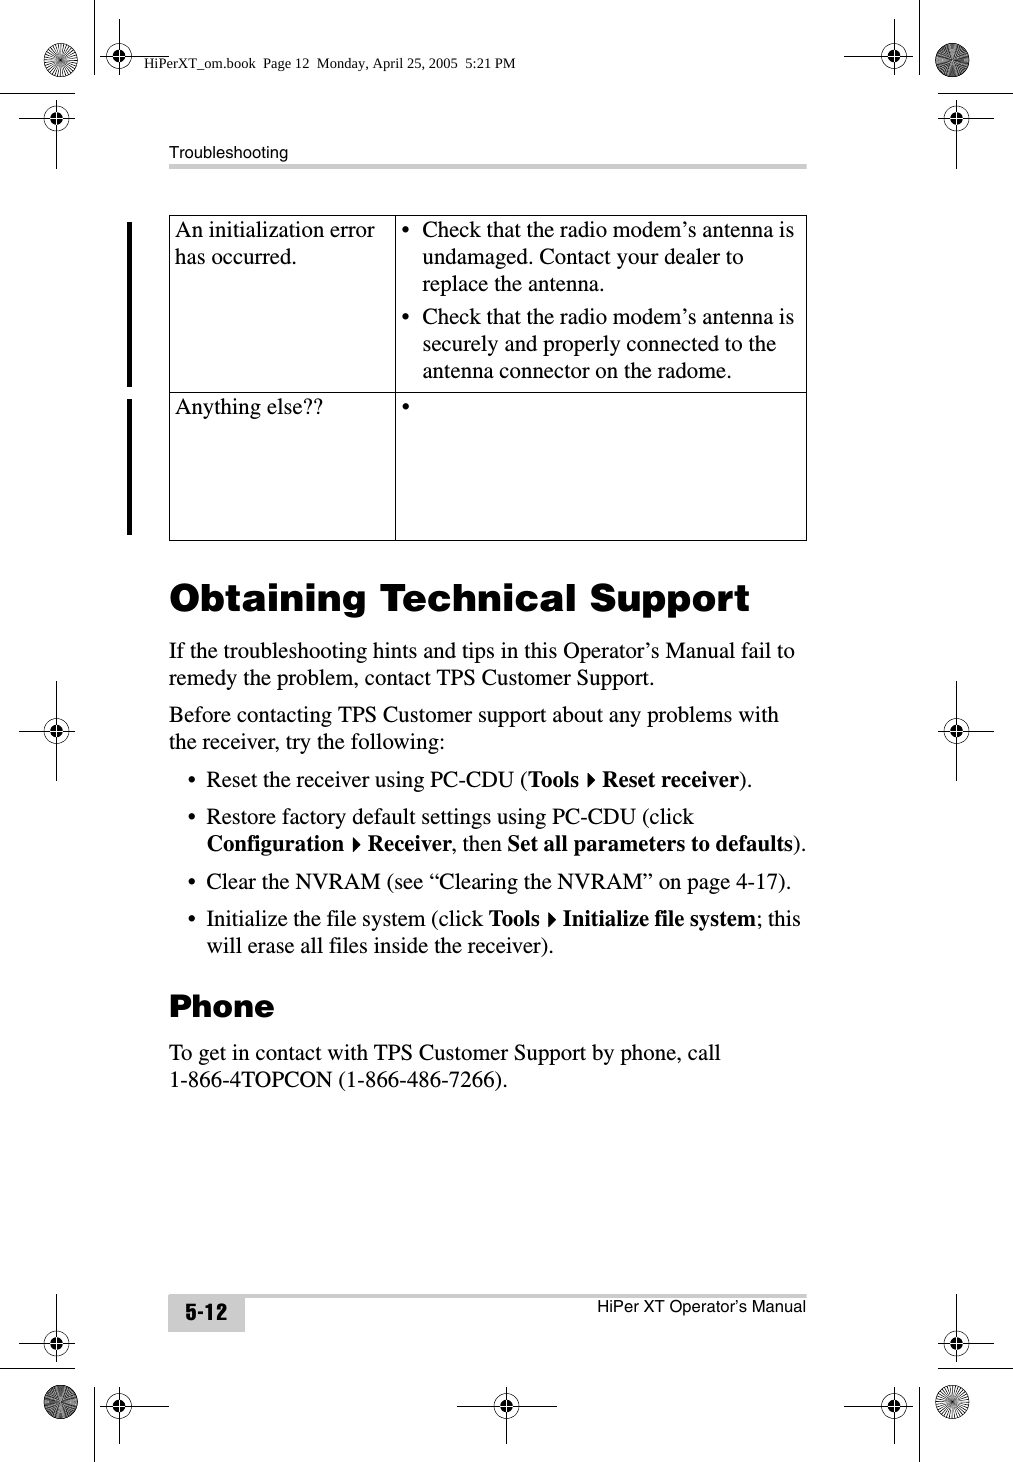 TroubleshootingHiPer XT Operator’s Manual5-12Obtaining Technical SupportIf the troubleshooting hints and tips in this Operator’s Manual fail to remedy the problem, contact TPS Customer Support.Before contacting TPS Customer support about any problems with the receiver, try the following:• Reset the receiver using PC-CDU (ToolsReset receiver).• Restore factory default settings using PC-CDU (click ConfigurationReceiver, then Set all parameters to defaults).• Clear the NVRAM (see “Clearing the NVRAM” on page 4-17).• Initialize the file system (click ToolsInitialize file system; this will erase all files inside the receiver).PhoneTo get in contact with TPS Customer Support by phone, call1-866-4TOPCON (1-866-486-7266).An initialization error has occurred.• Check that the radio modem’s antenna is undamaged. Contact your dealer to replace the antenna.• Check that the radio modem’s antenna is securely and properly connected to the antenna connector on the radome.Anything else?? •HiPerXT_om.book  Page 12  Monday, April 25, 2005  5:21 PM